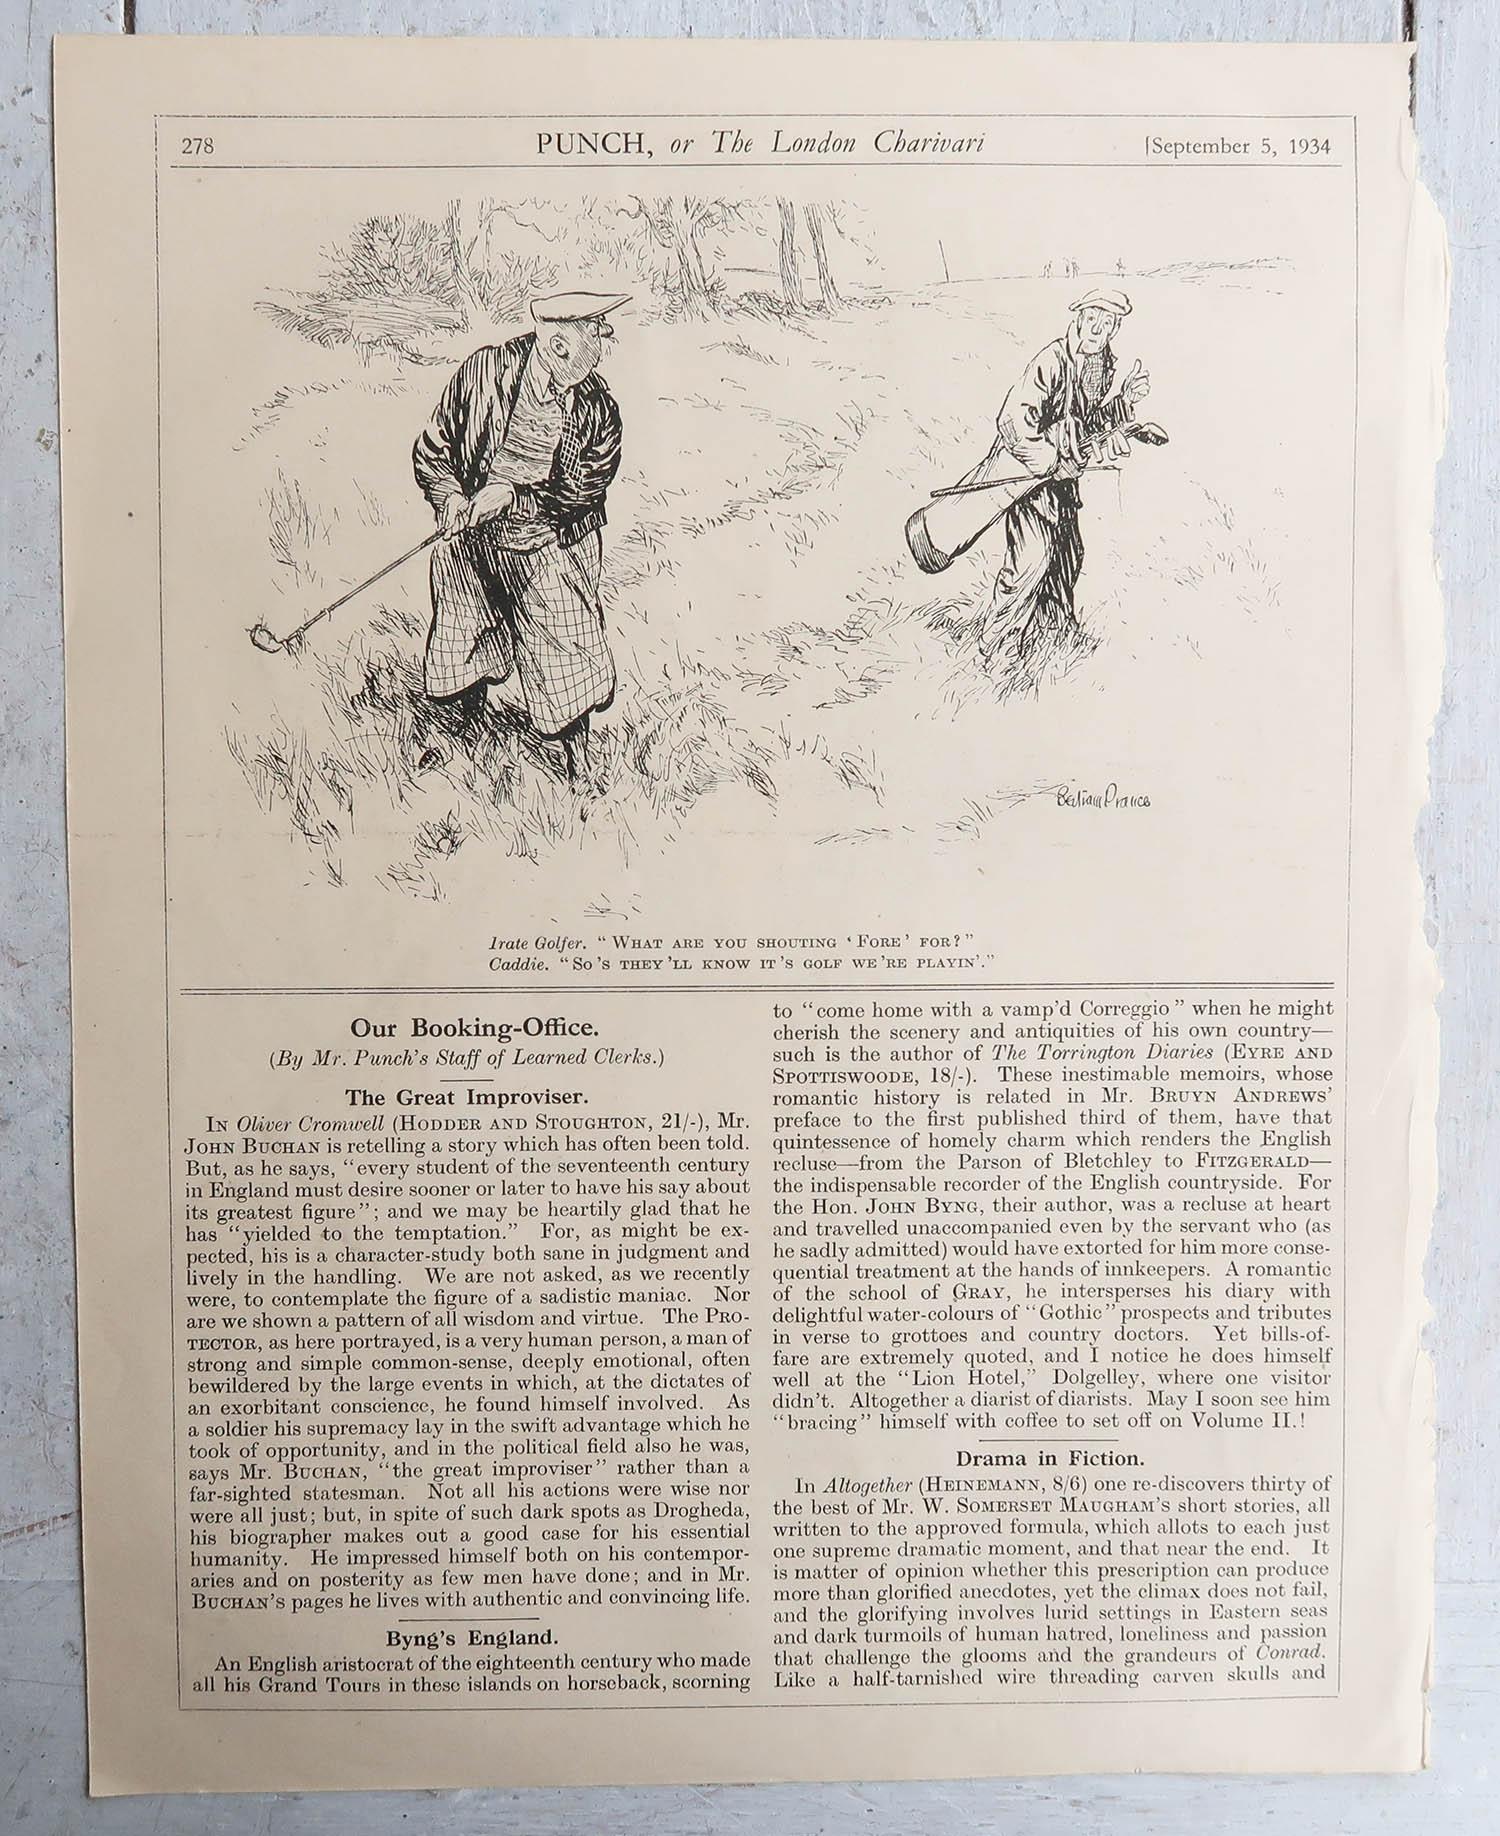 Super golfing images 

Originally plates from Punch or The London Charivari

Published 1934

The measurement given is the actual image. Not the paper size



